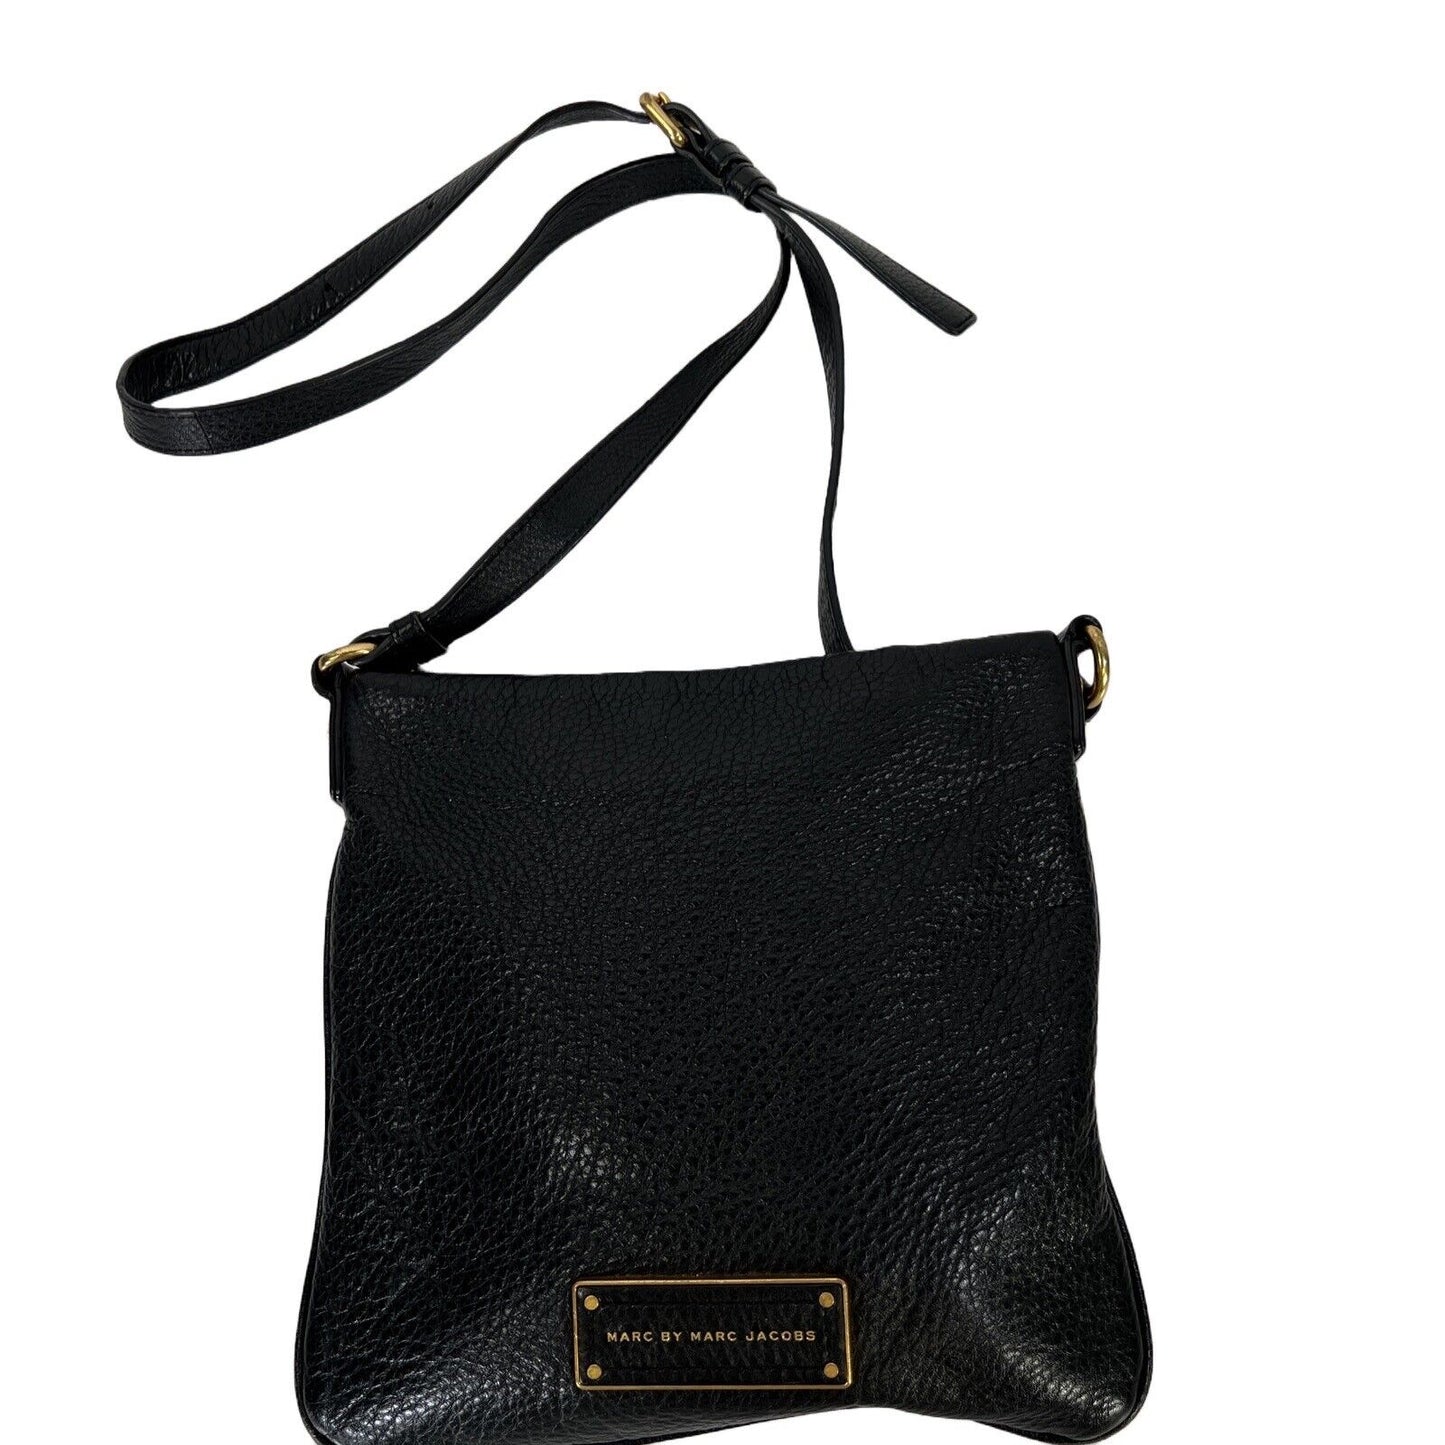 Marc by Marc Jacobs Black Pebbled Leather Crossbody Purse